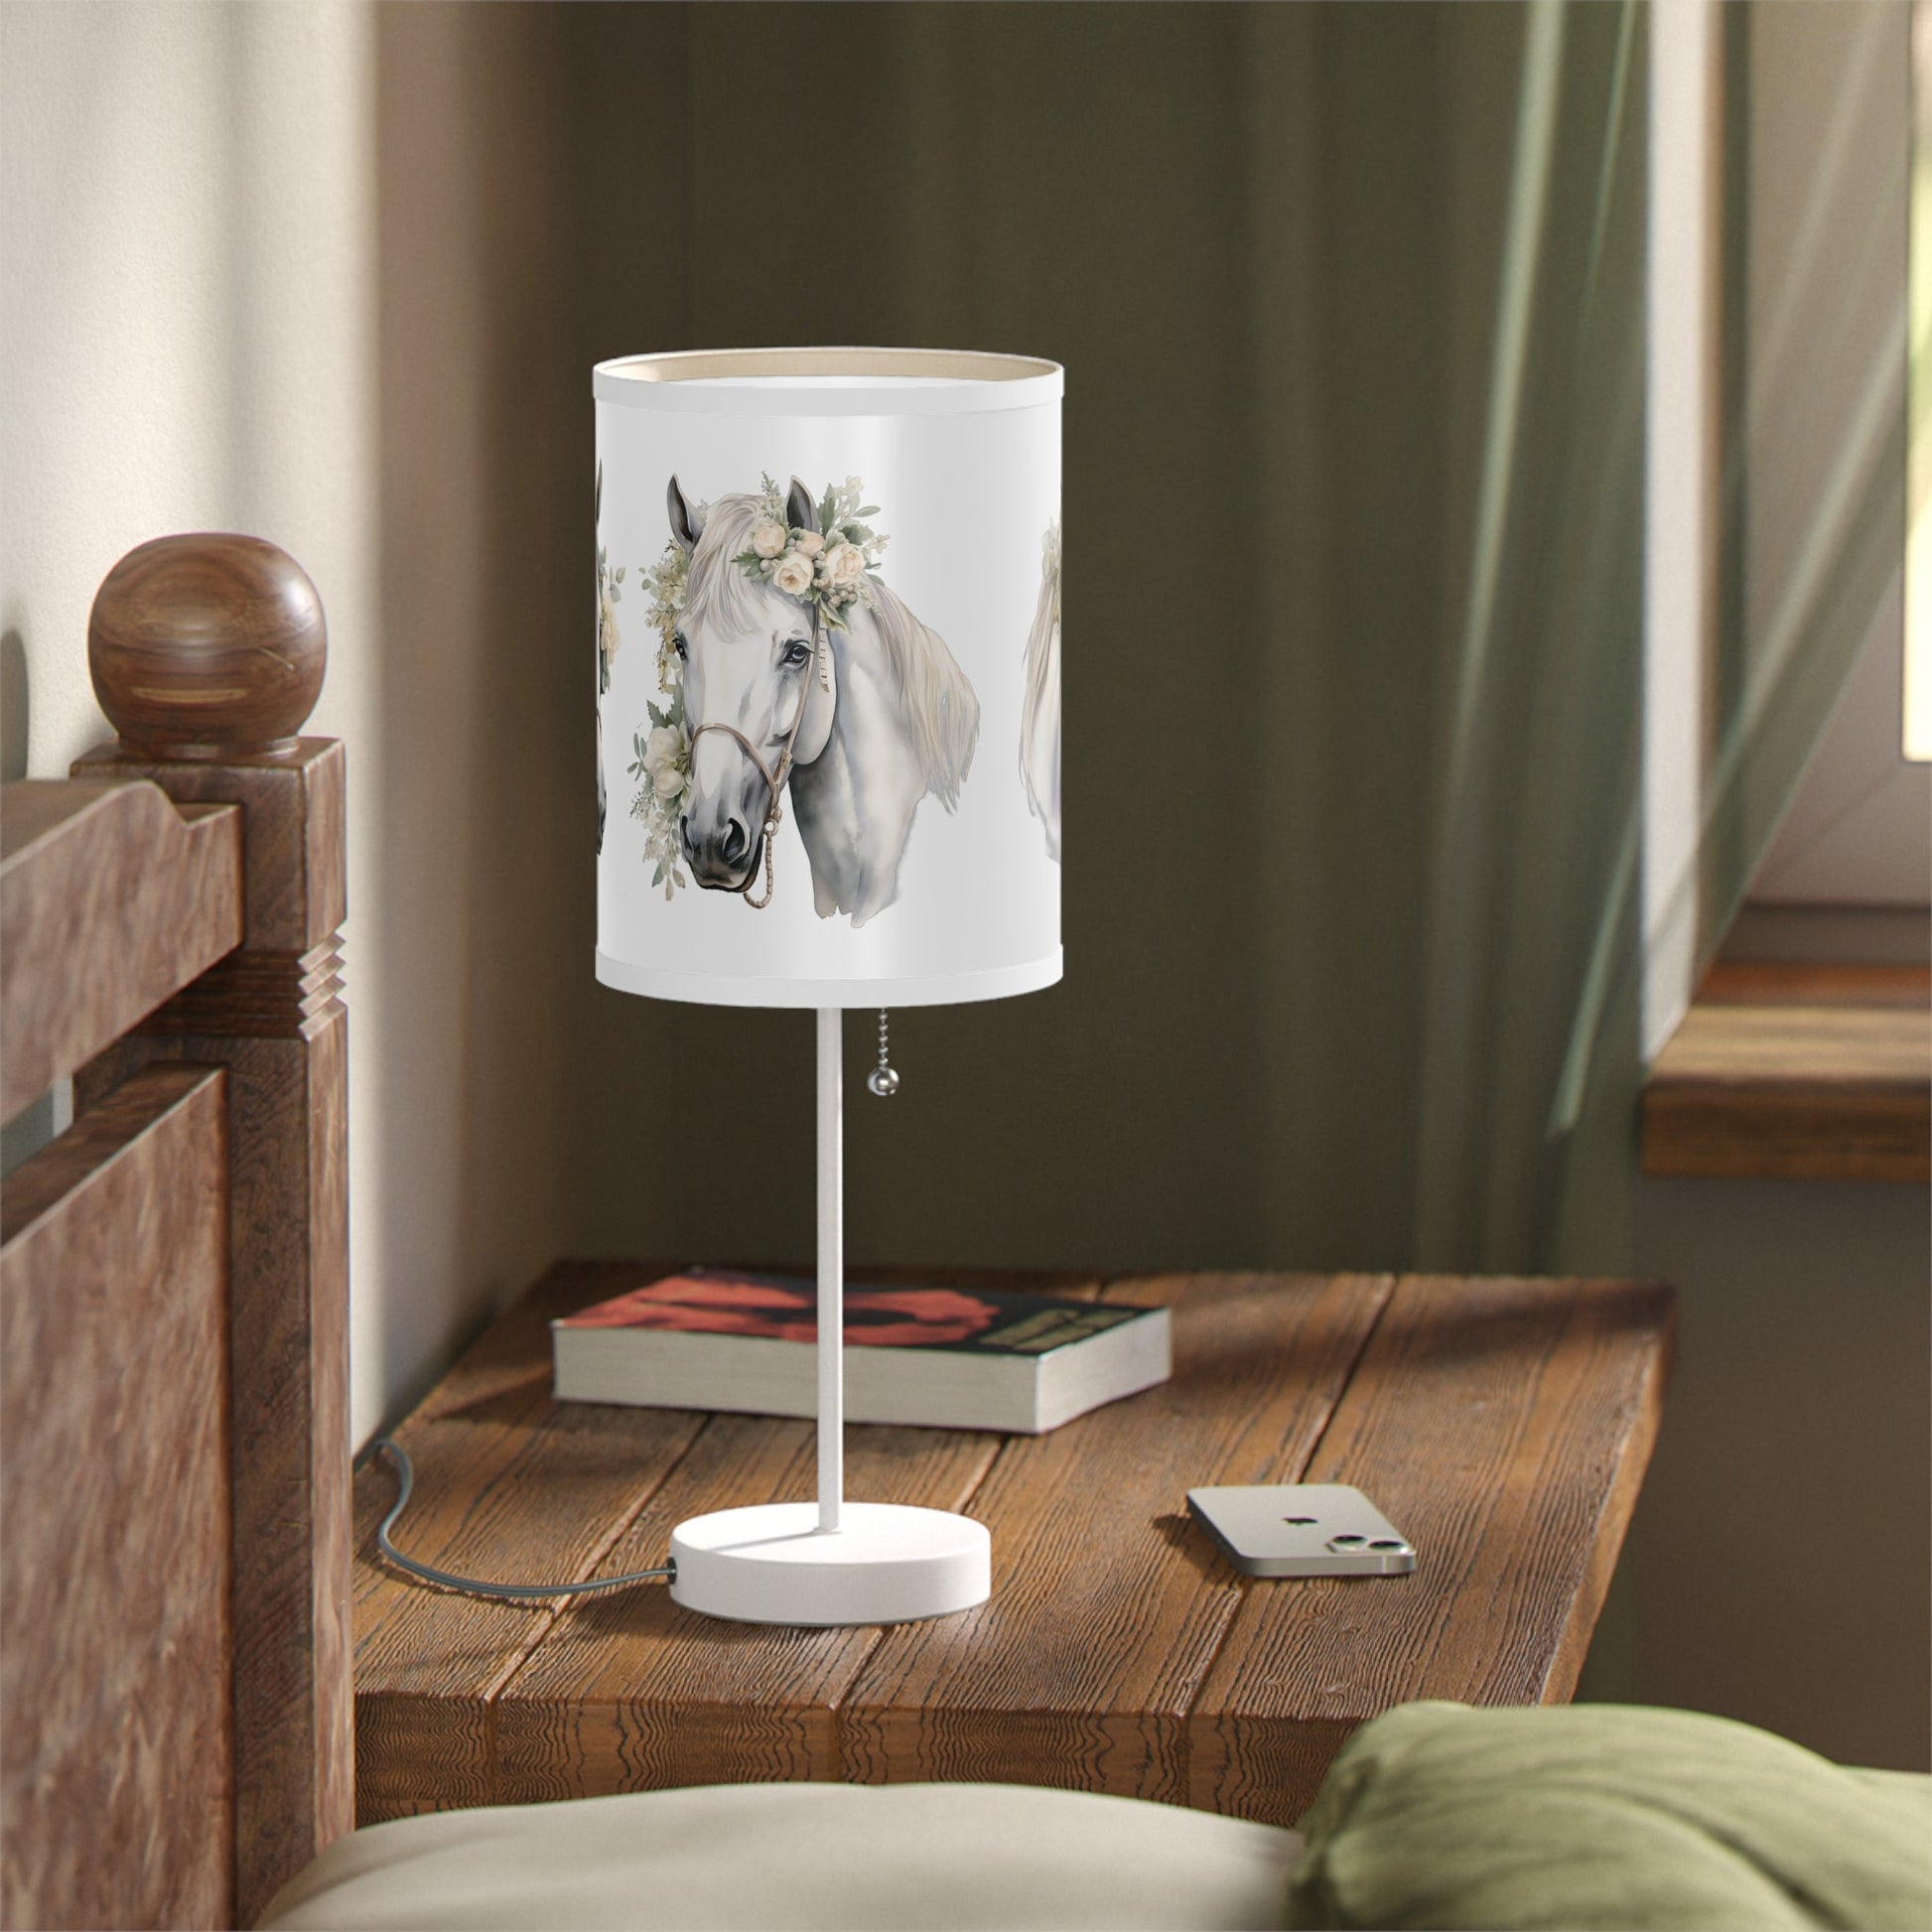 White Horse Head Lamp, Perfect Girls Room Fantasy Floral Pony Head Design Accent Lamp, Fancy Ladies Accent, Equine Desk Lamp, Office light - FlooredByArt